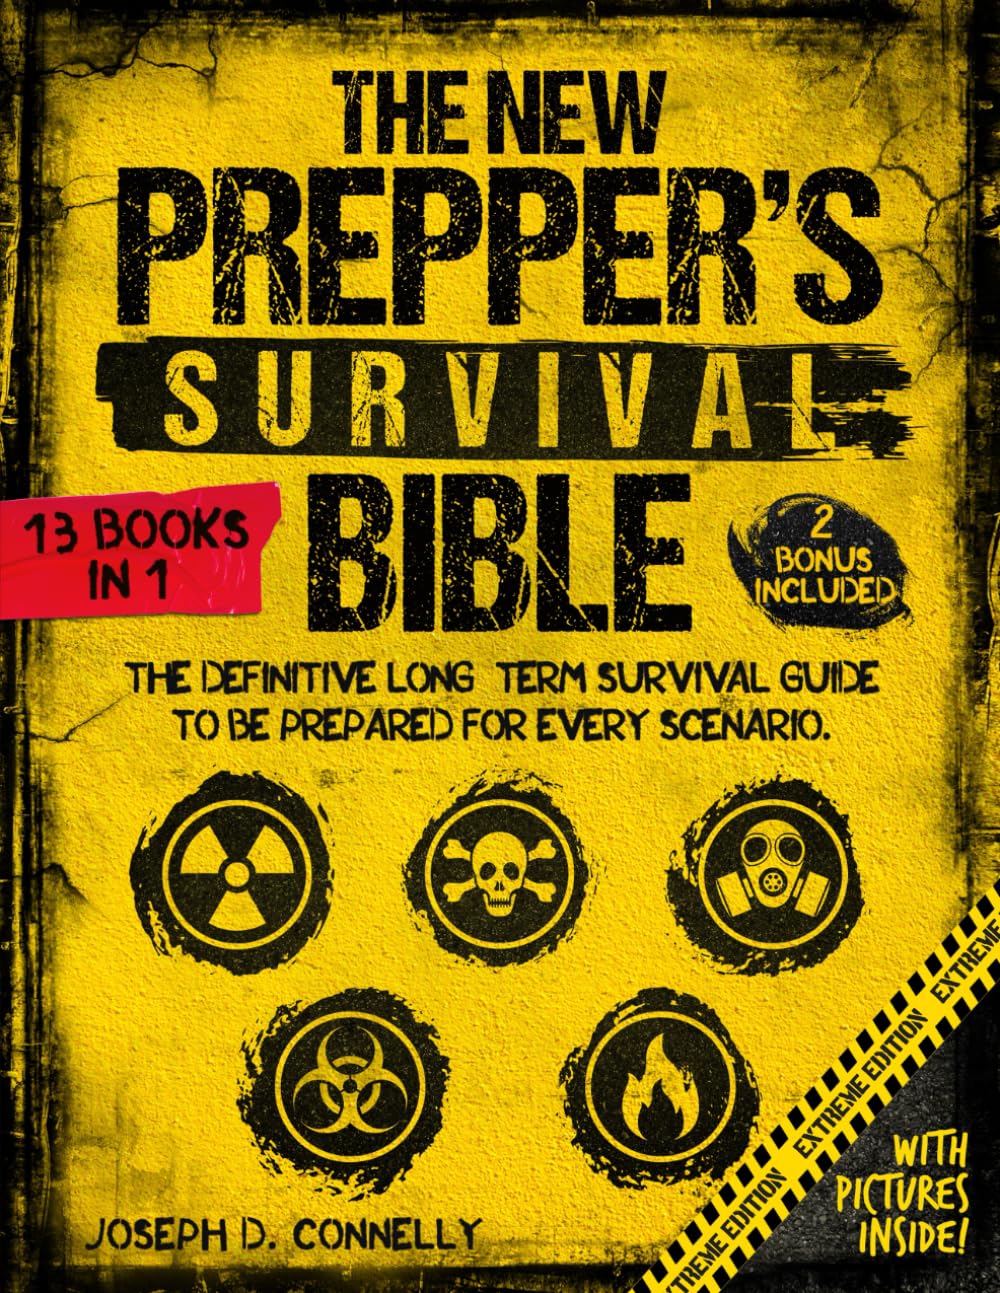 The Preppers Survival Bible